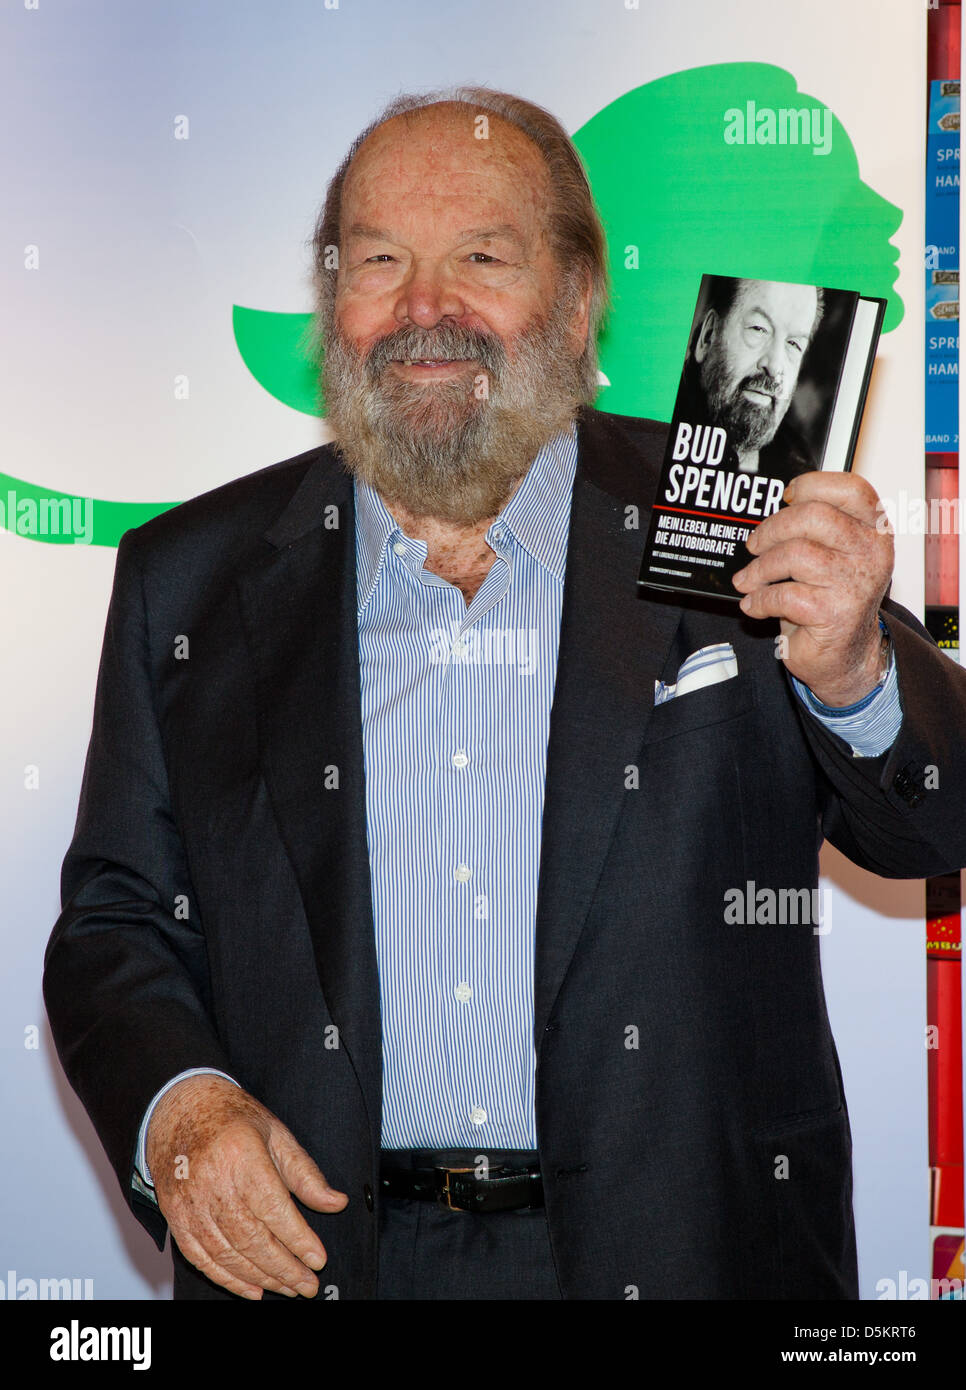 Bud spencer hi-res stock photography and images - Page 2 - Alamy